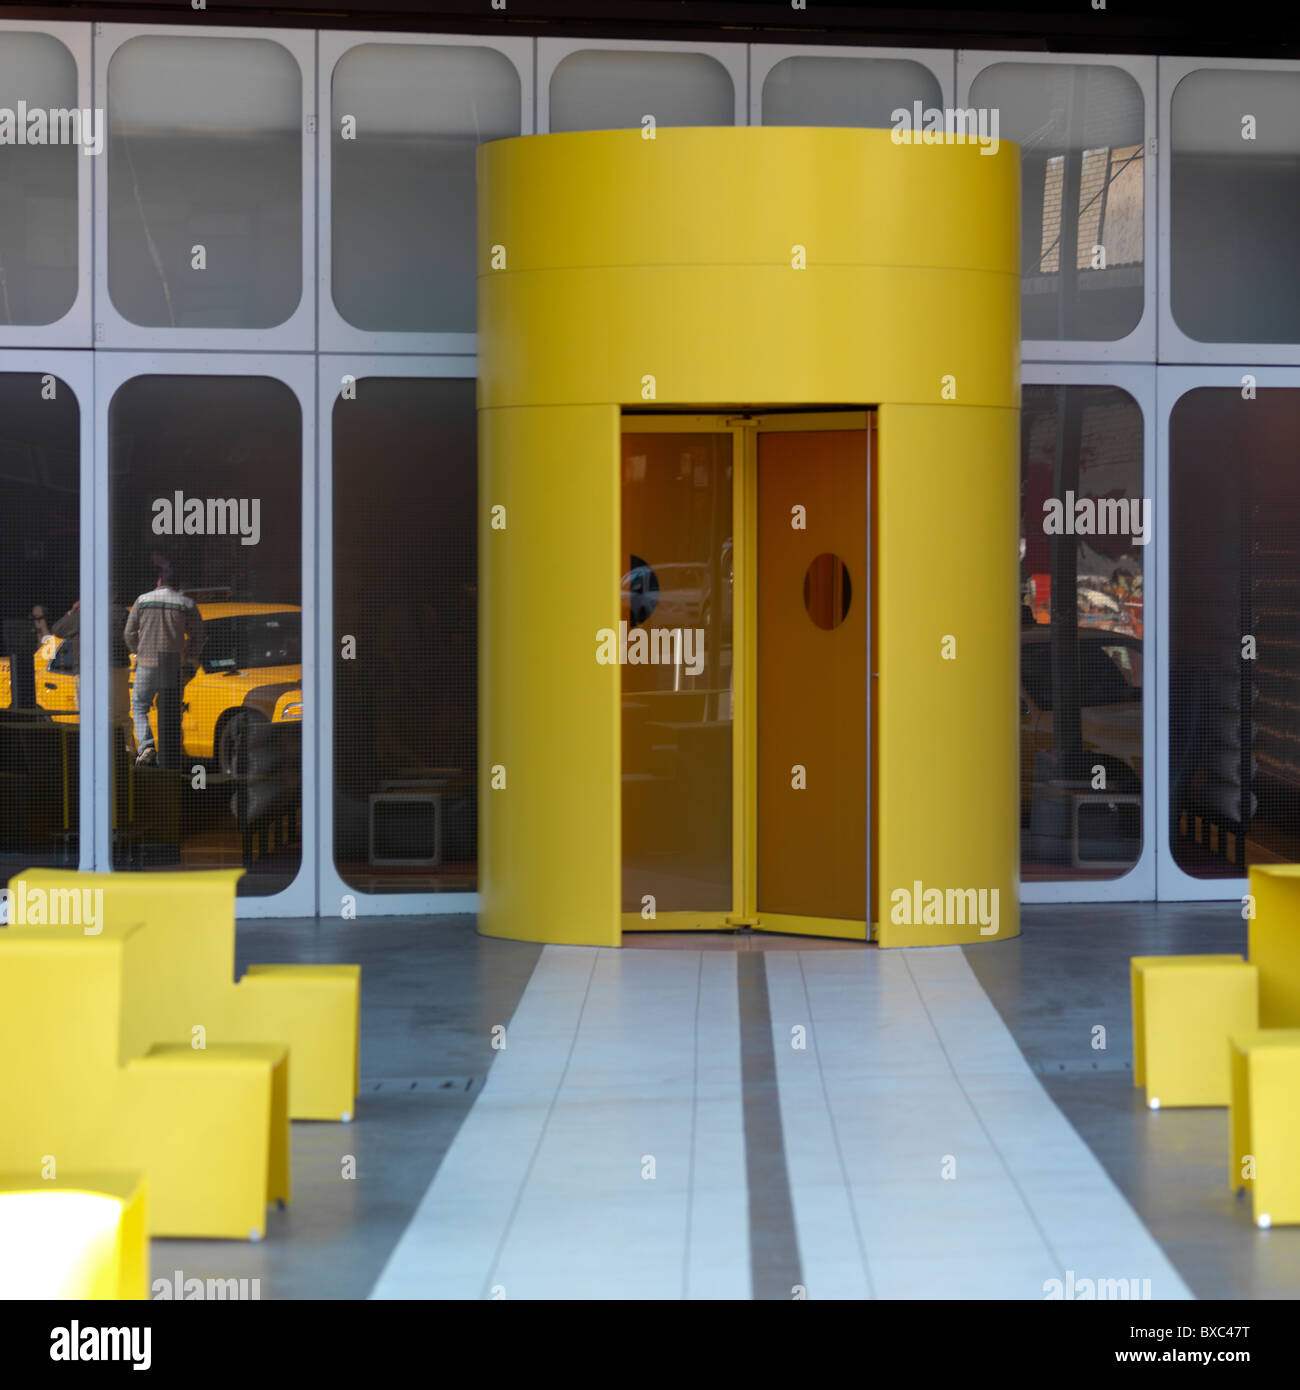 Yellow doorway entrance to the Standard Hotel in Manhattan, New York City, U.S.A. Stock Photo